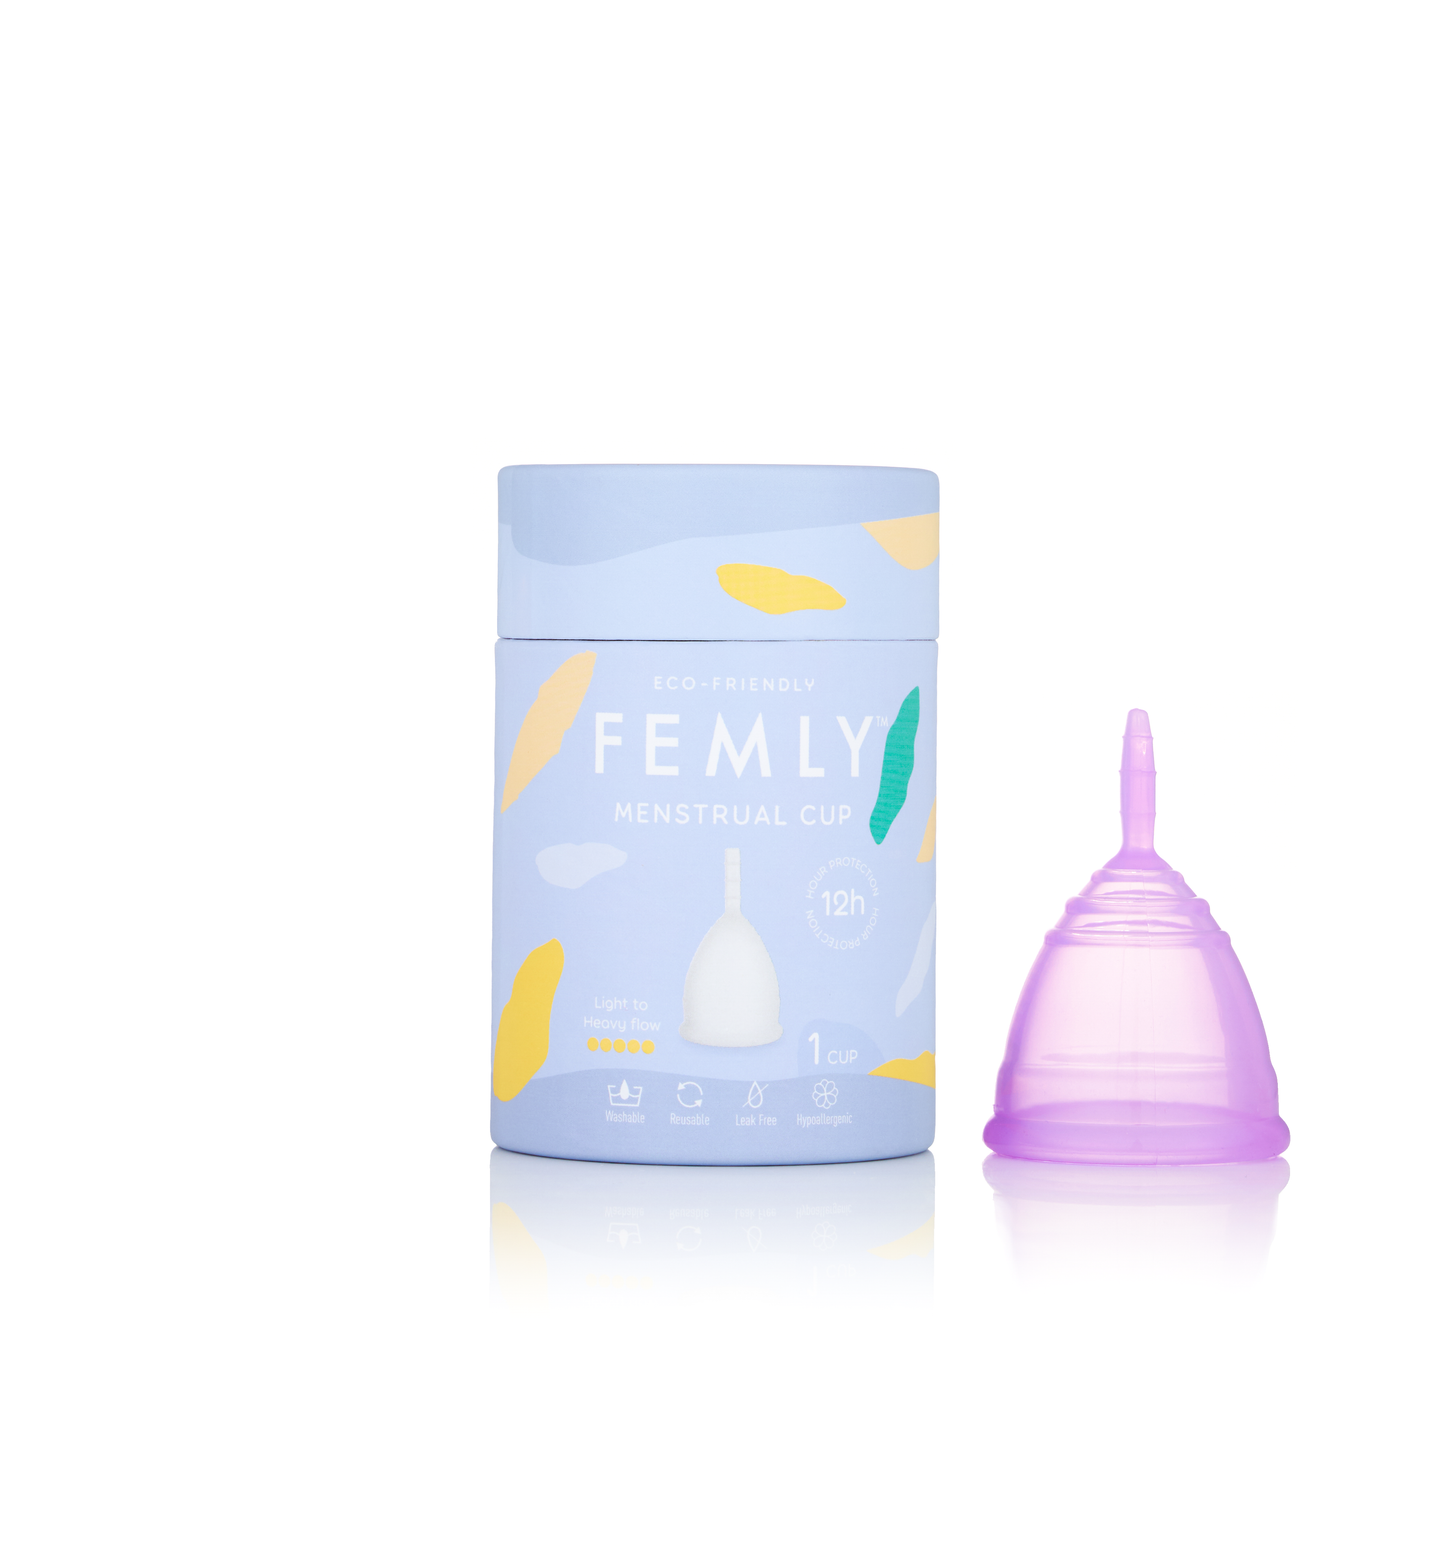 Menstrual cup (OLD)